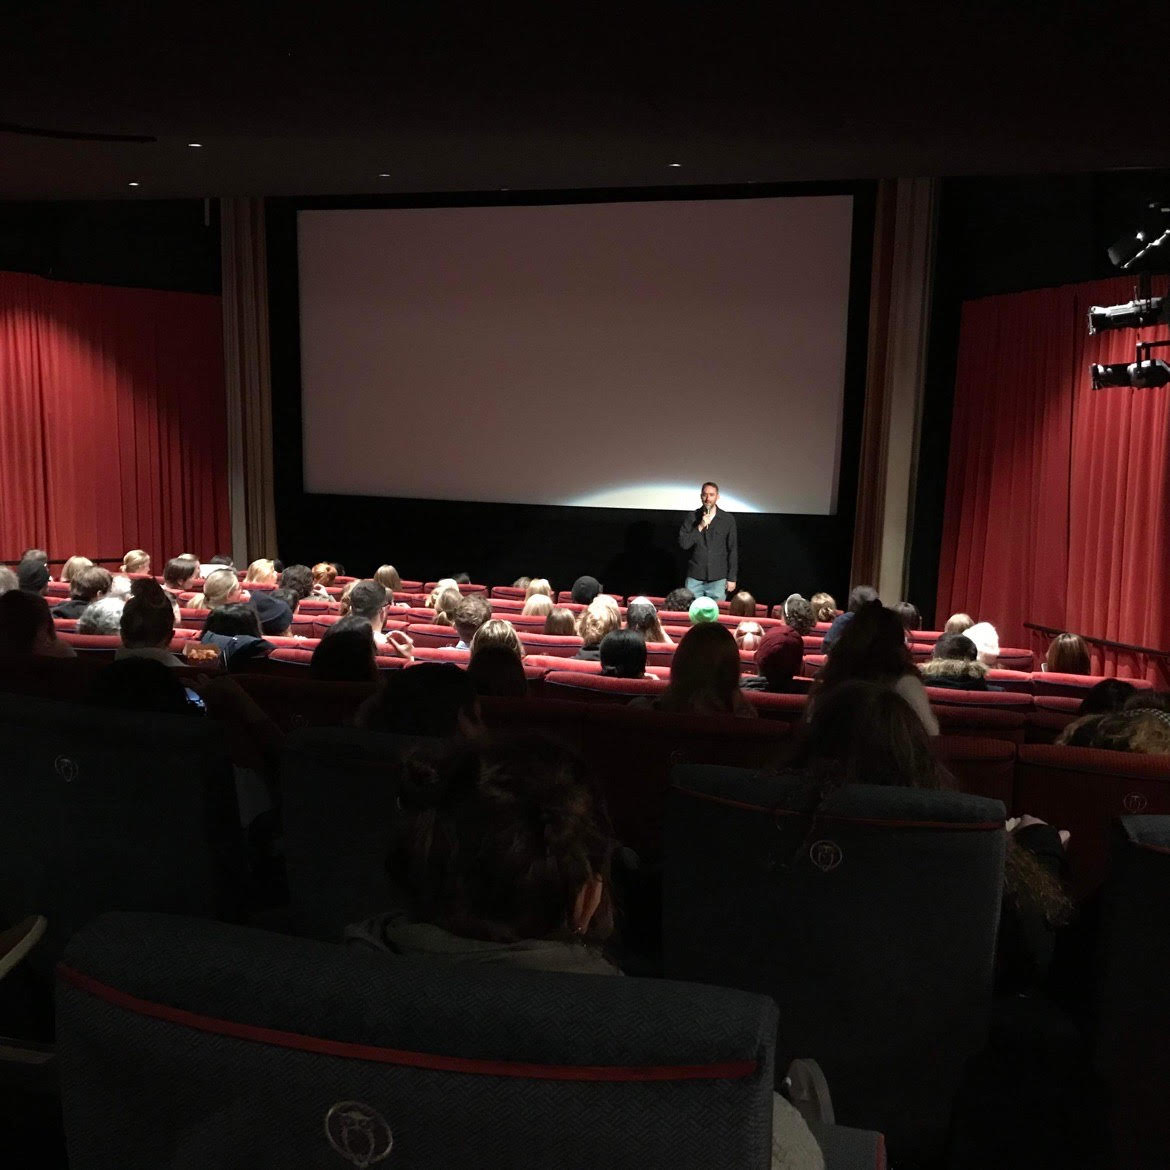 People sat in a cinema room at a "secret screening" that showed animal rights documentary Dominion 